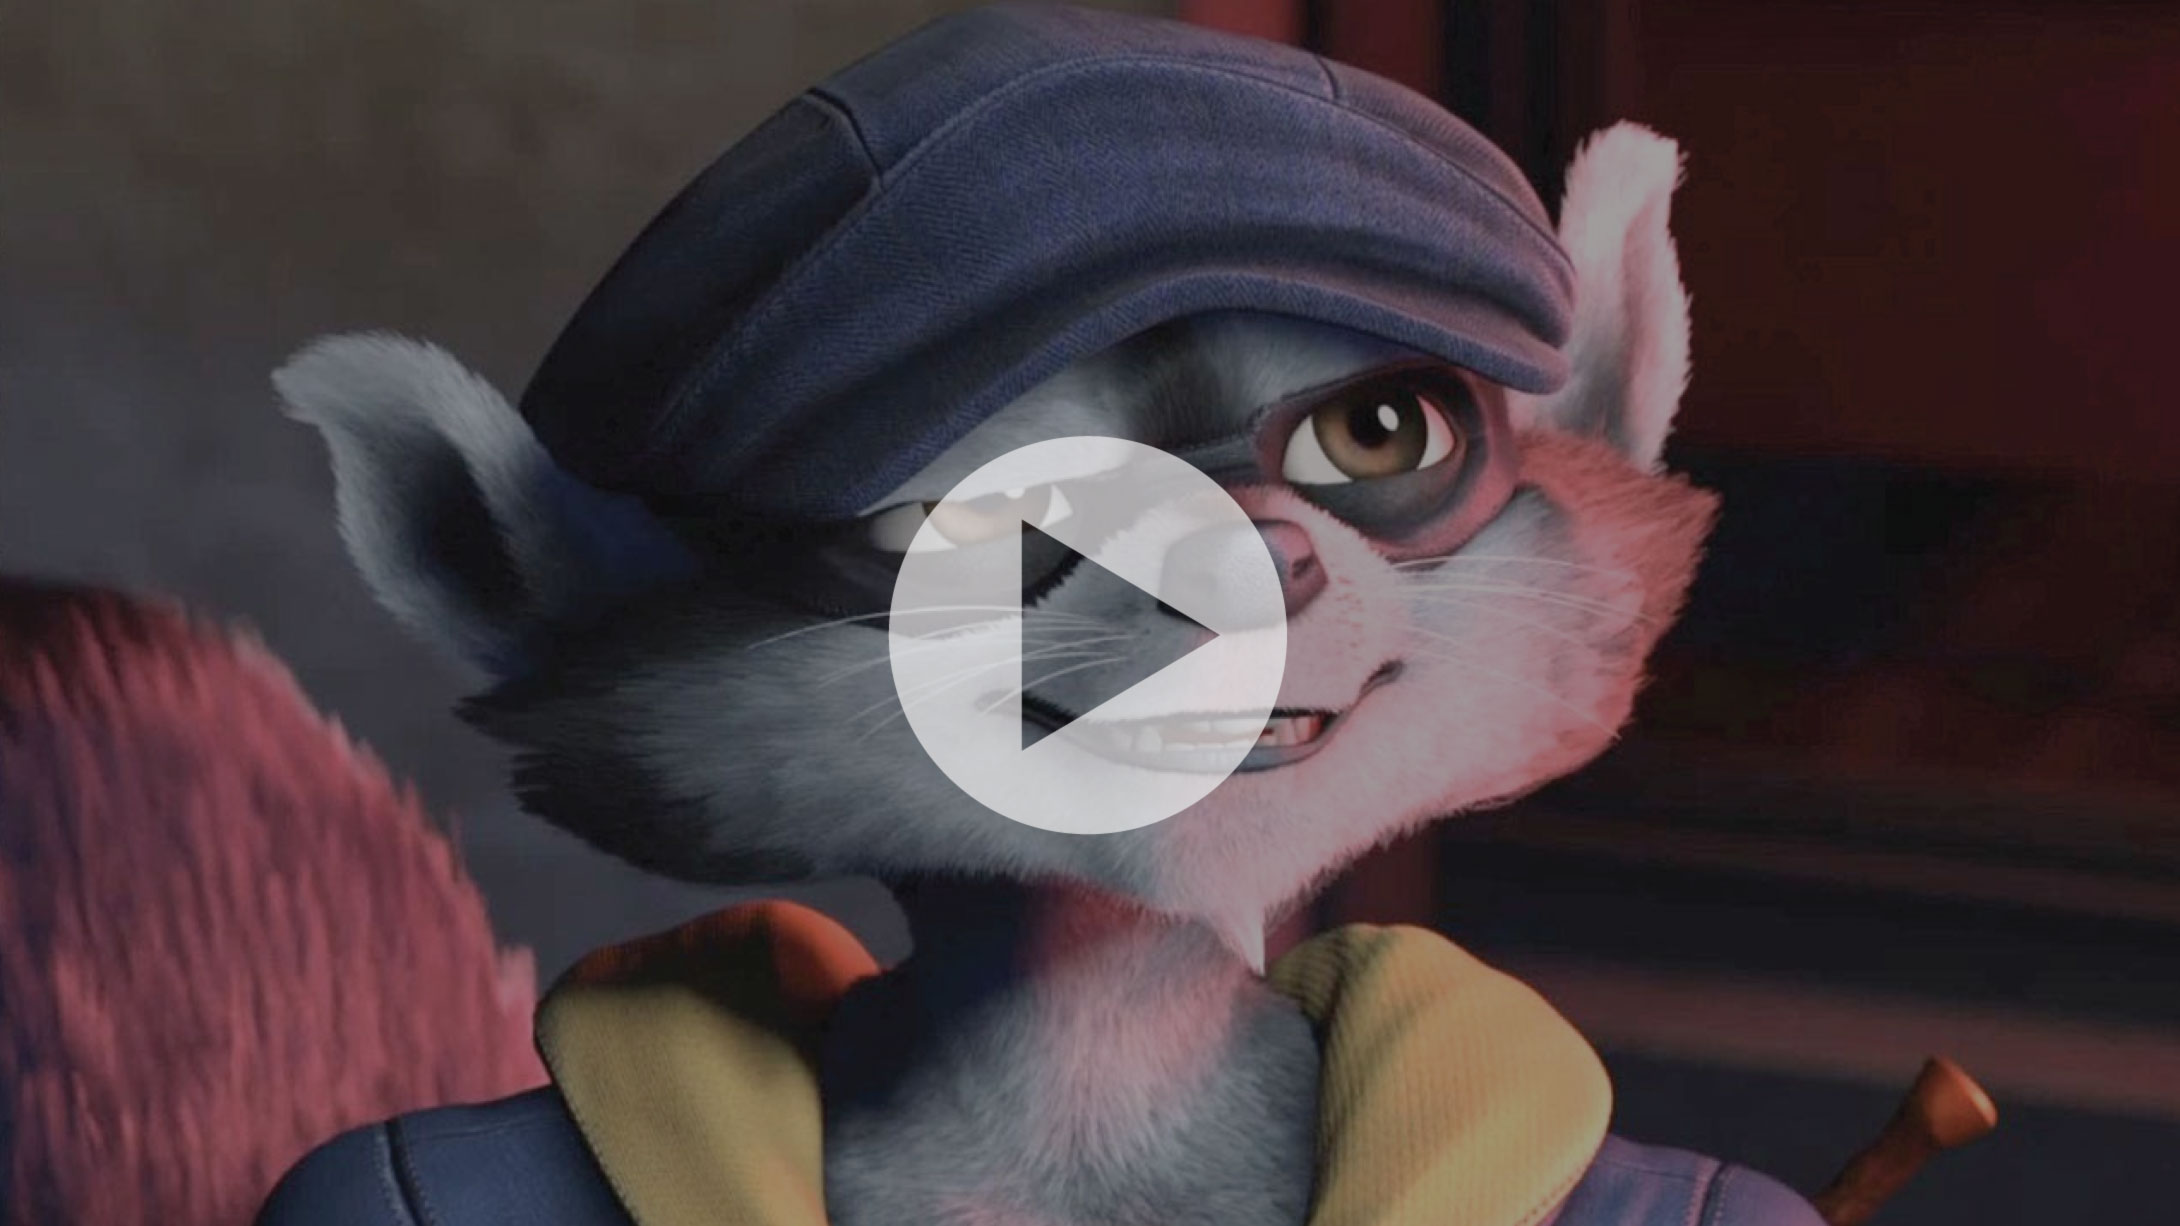 Sly Cooper: Thieves In Time Costume Trailer 